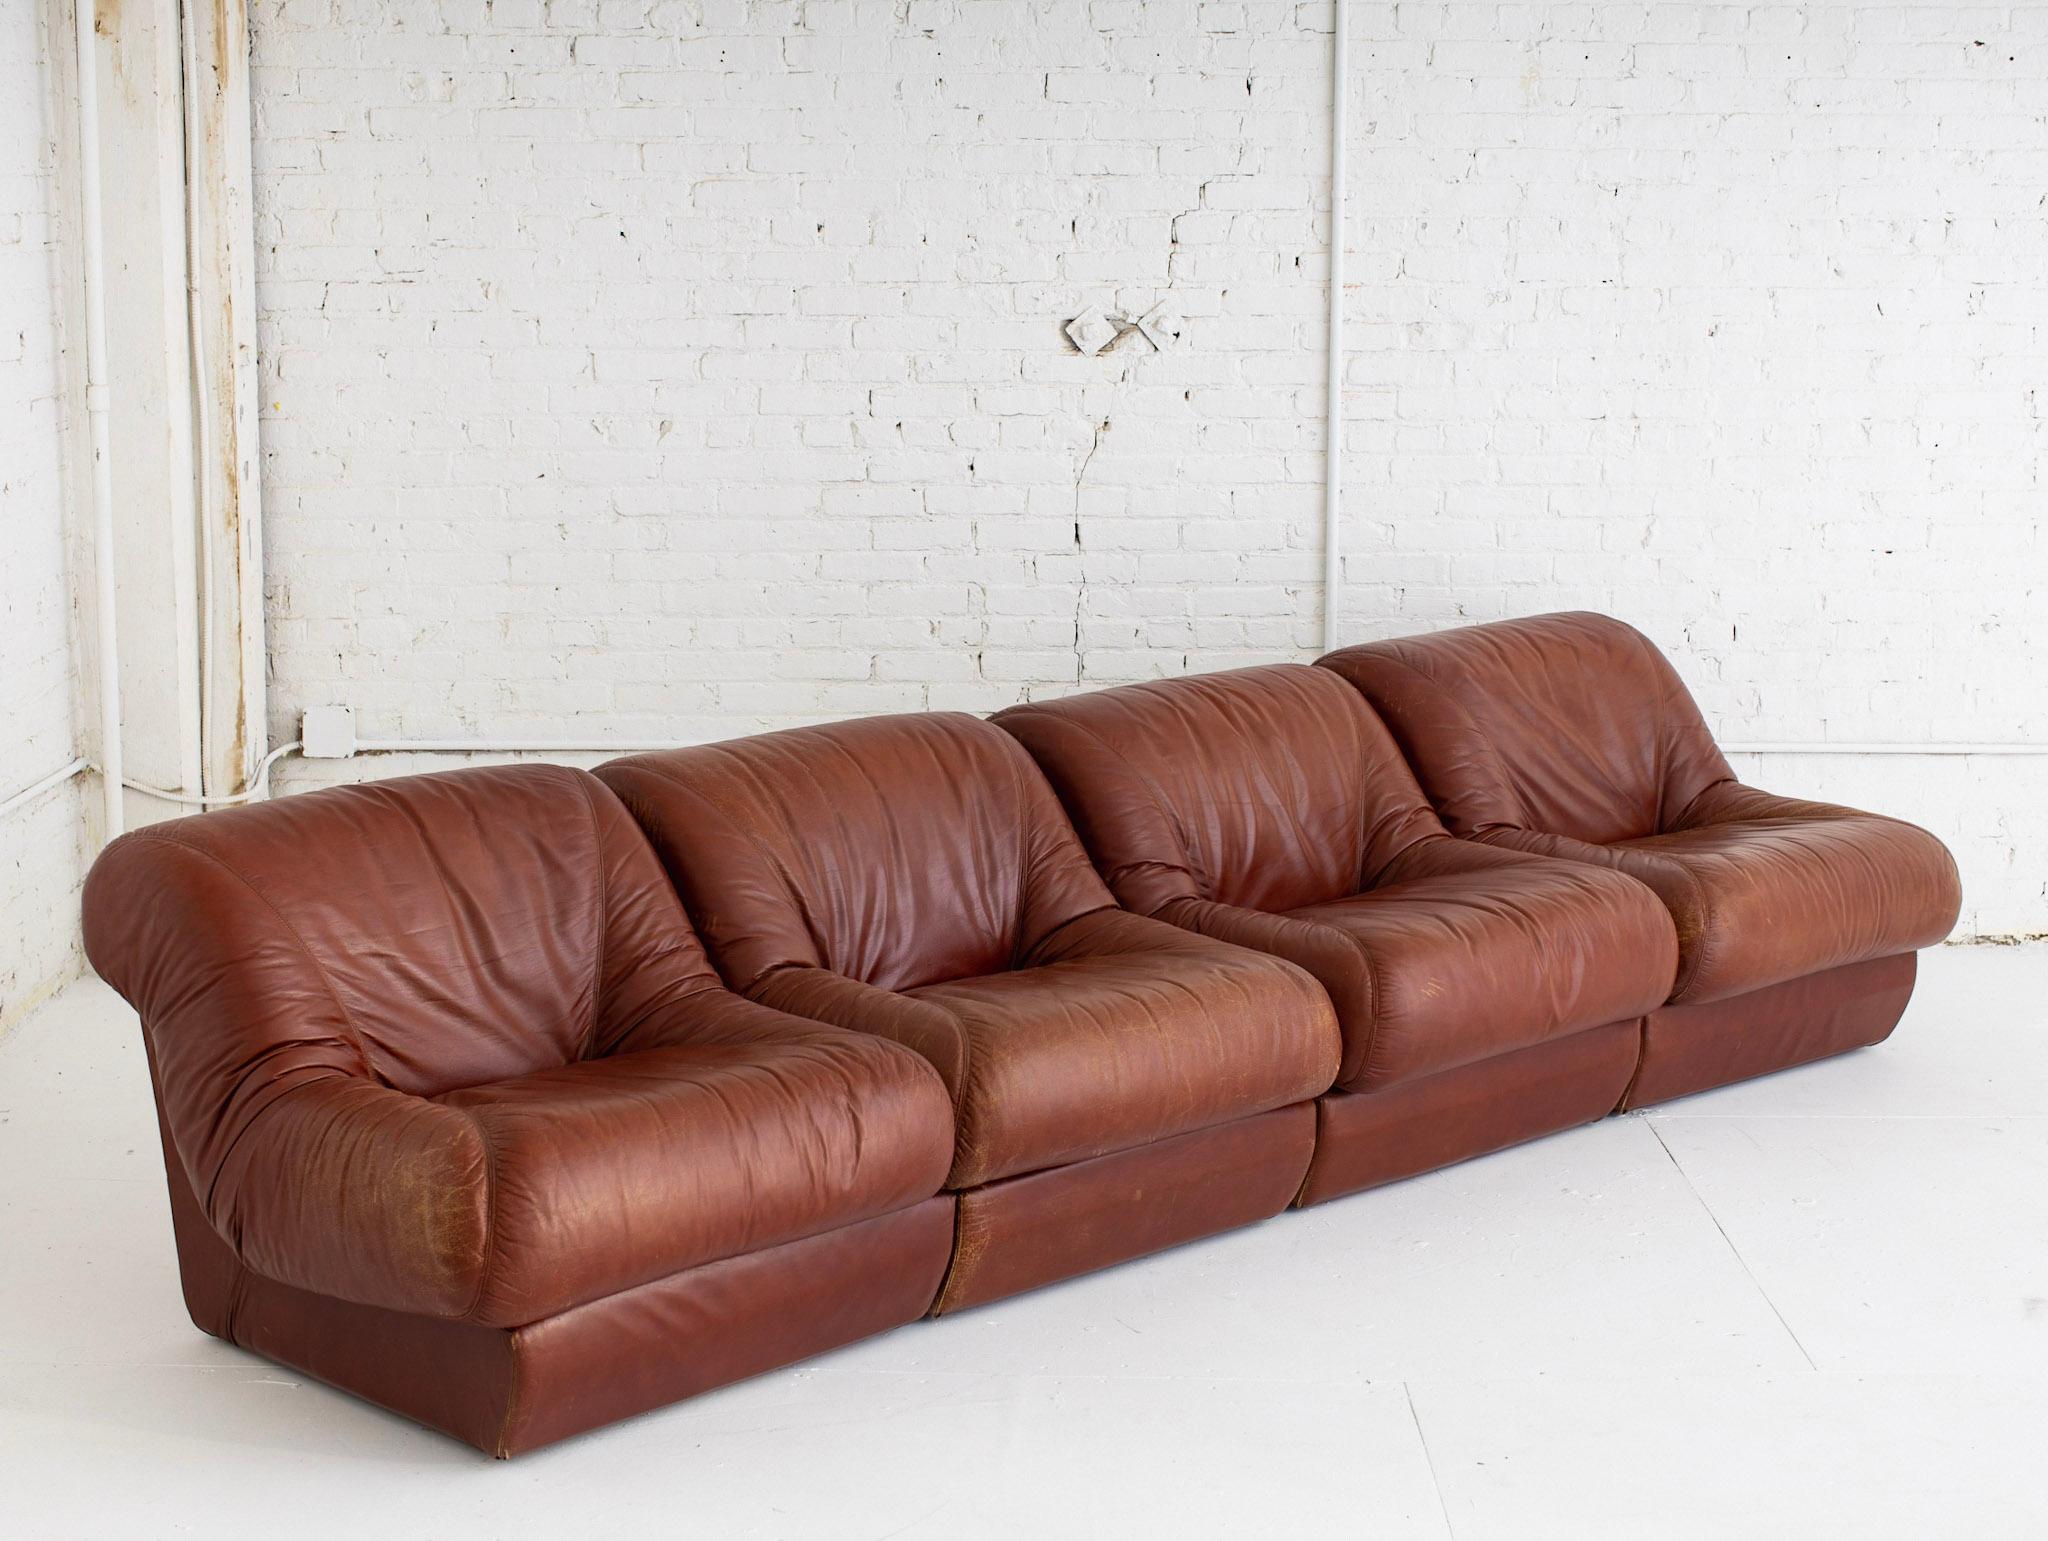 4 piece modular sofa in original caramel leather. 1960s Italian design. Sourced outside of Florence, Italy. Sections can be arranged independently or together at your discretion. Each section measures 33” wide.